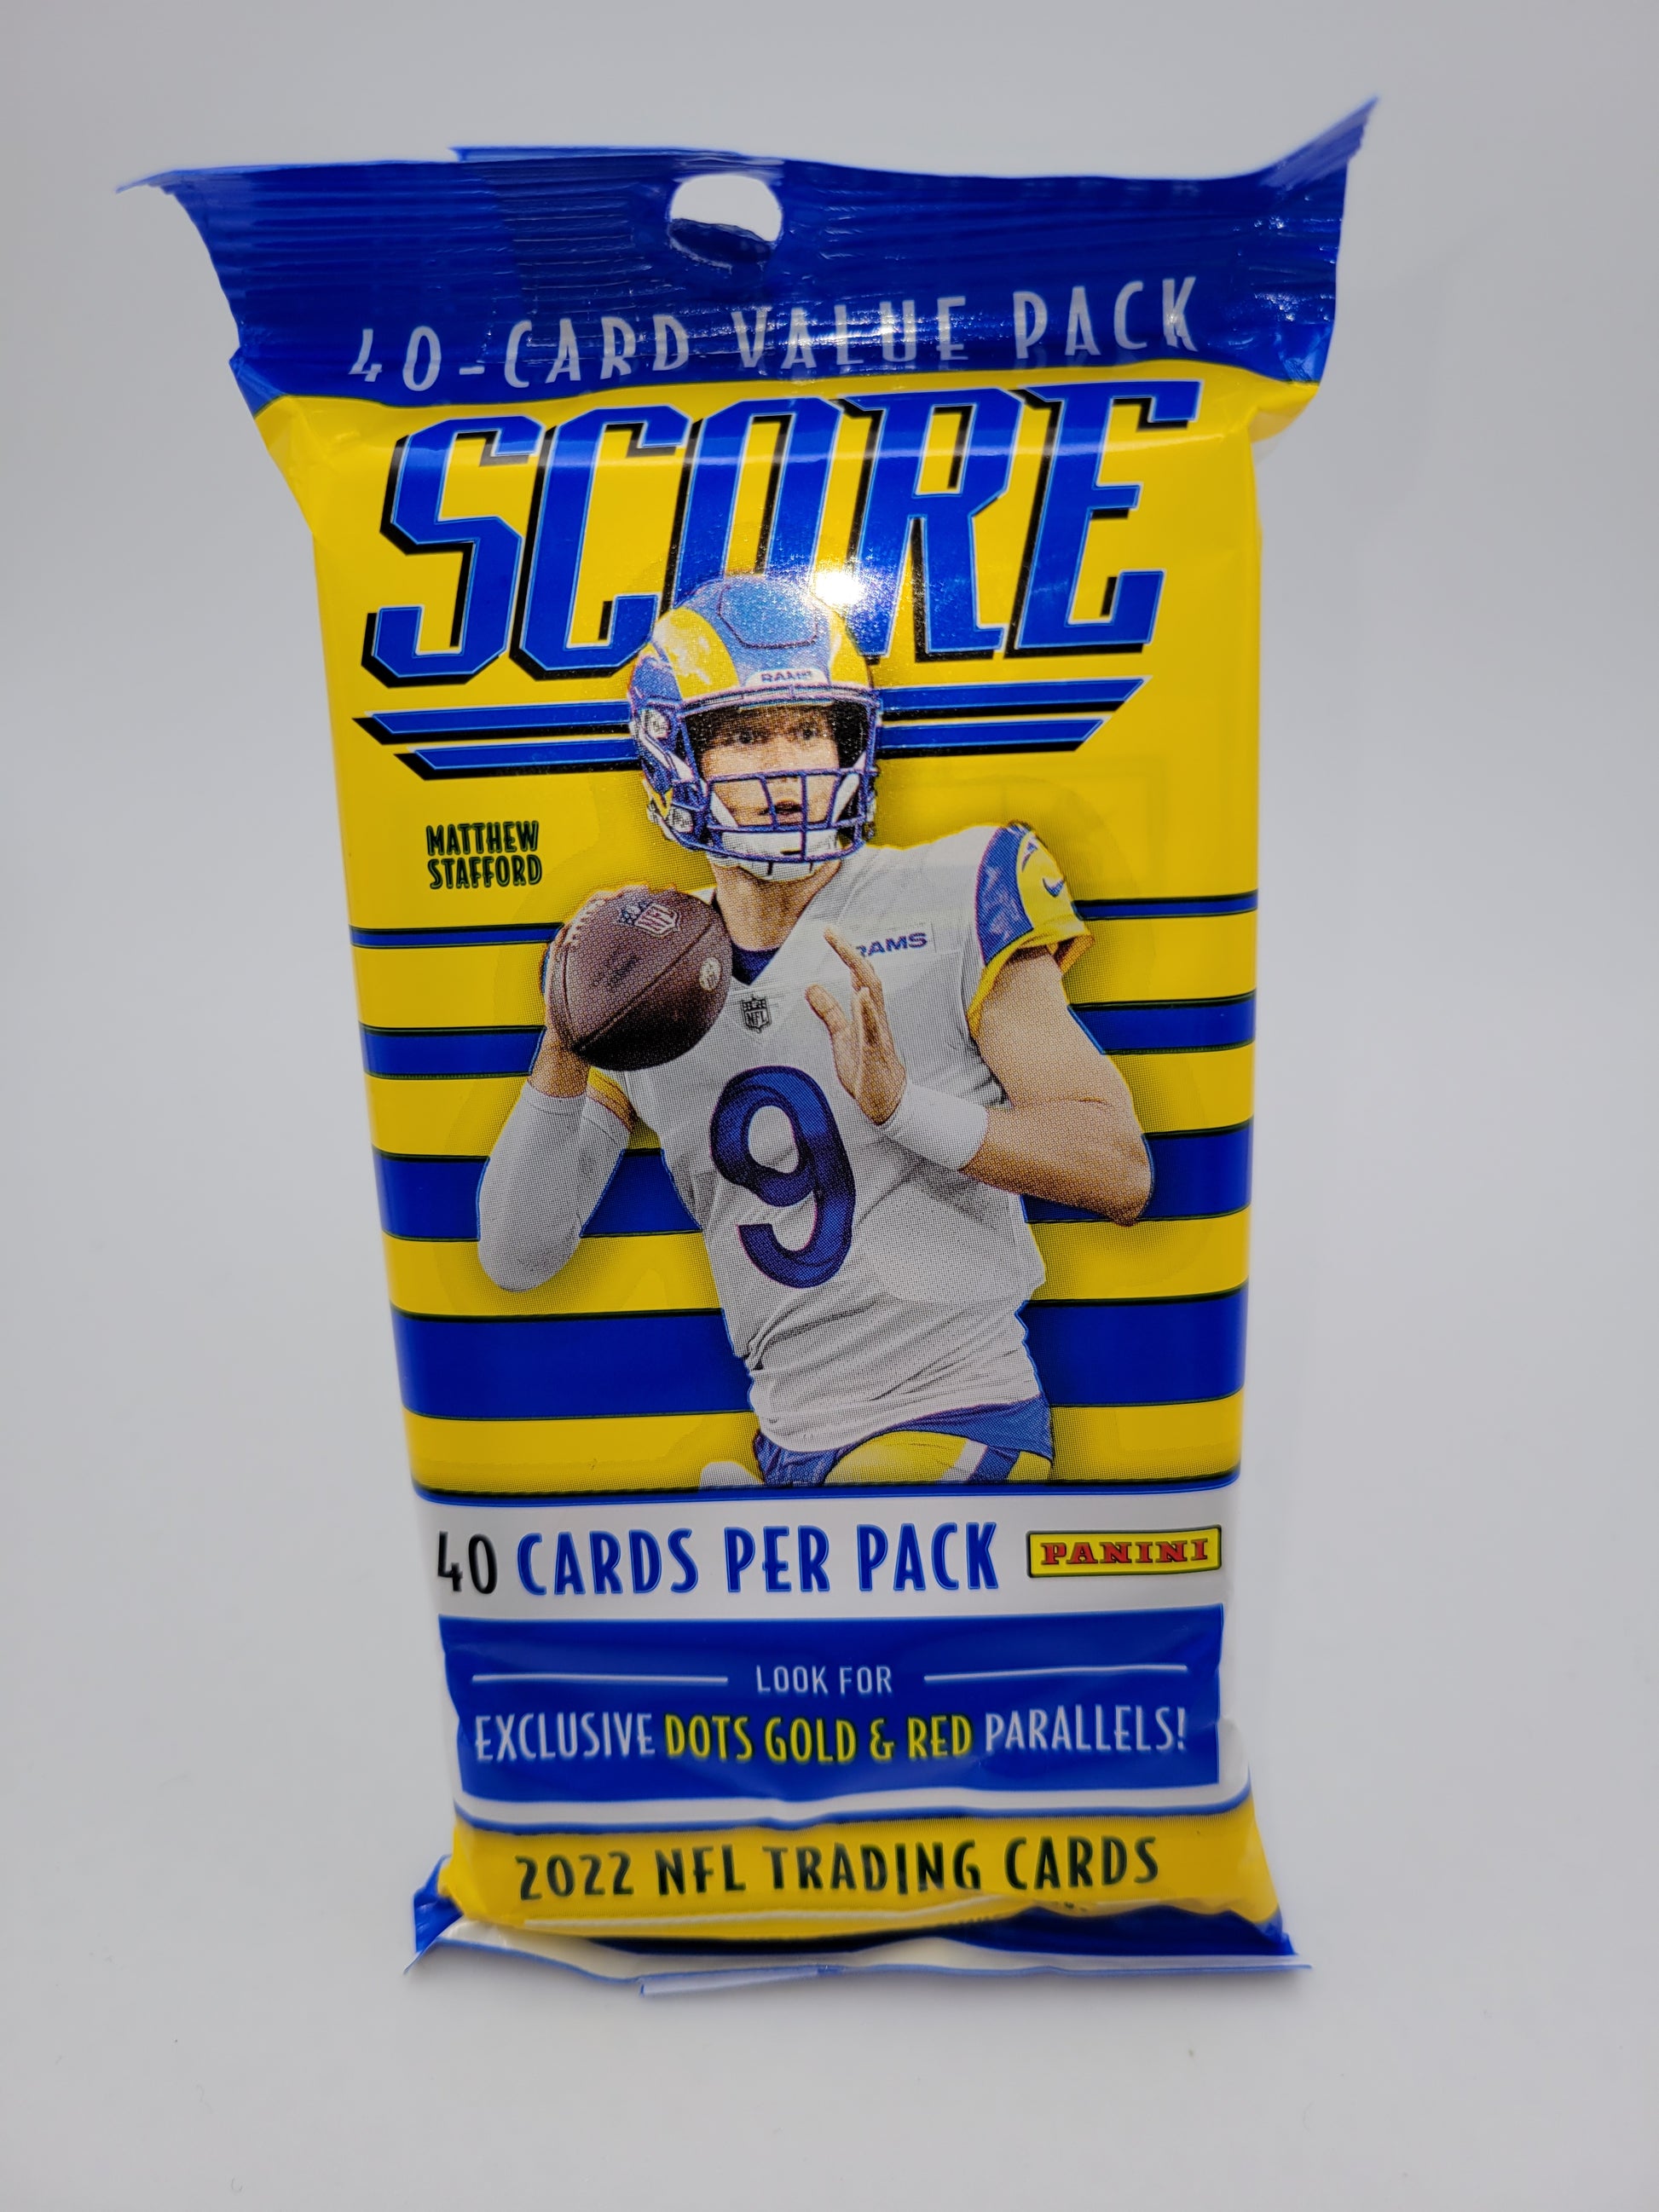 2022 NFL Score Football 40 cards per pack Fat Pack Look for Exclusive Dots Gold & Red Parallelsl